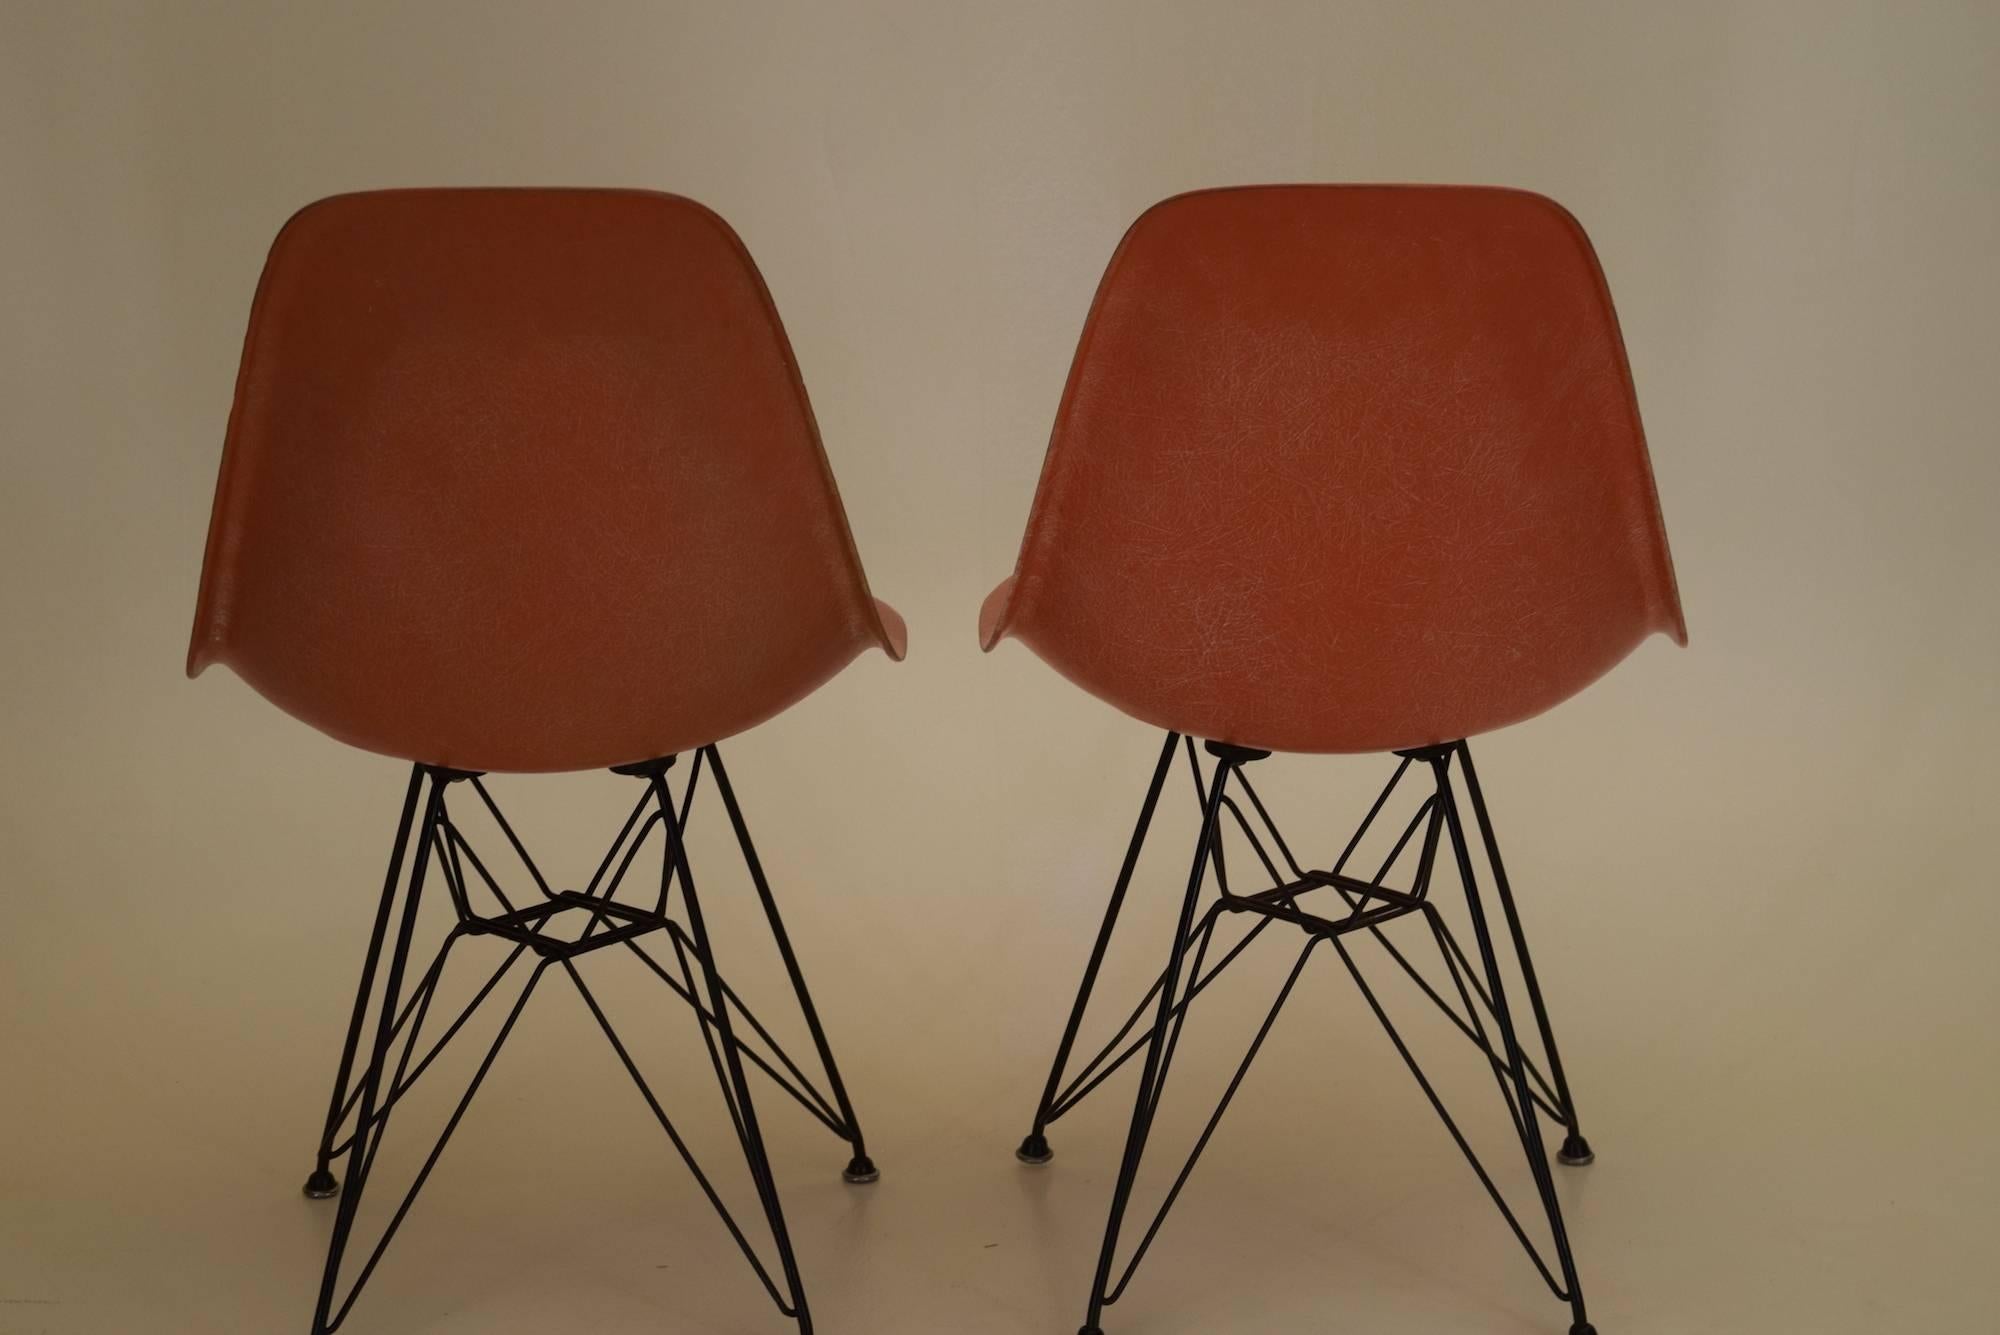 These shell chairs are original fiberglass chairs designed by Eames and produced by Herman Miller, circa 1952.

The color is orange. We have a salmon color chair available within another listing.

The bases are 100% original Eiffel bases dating